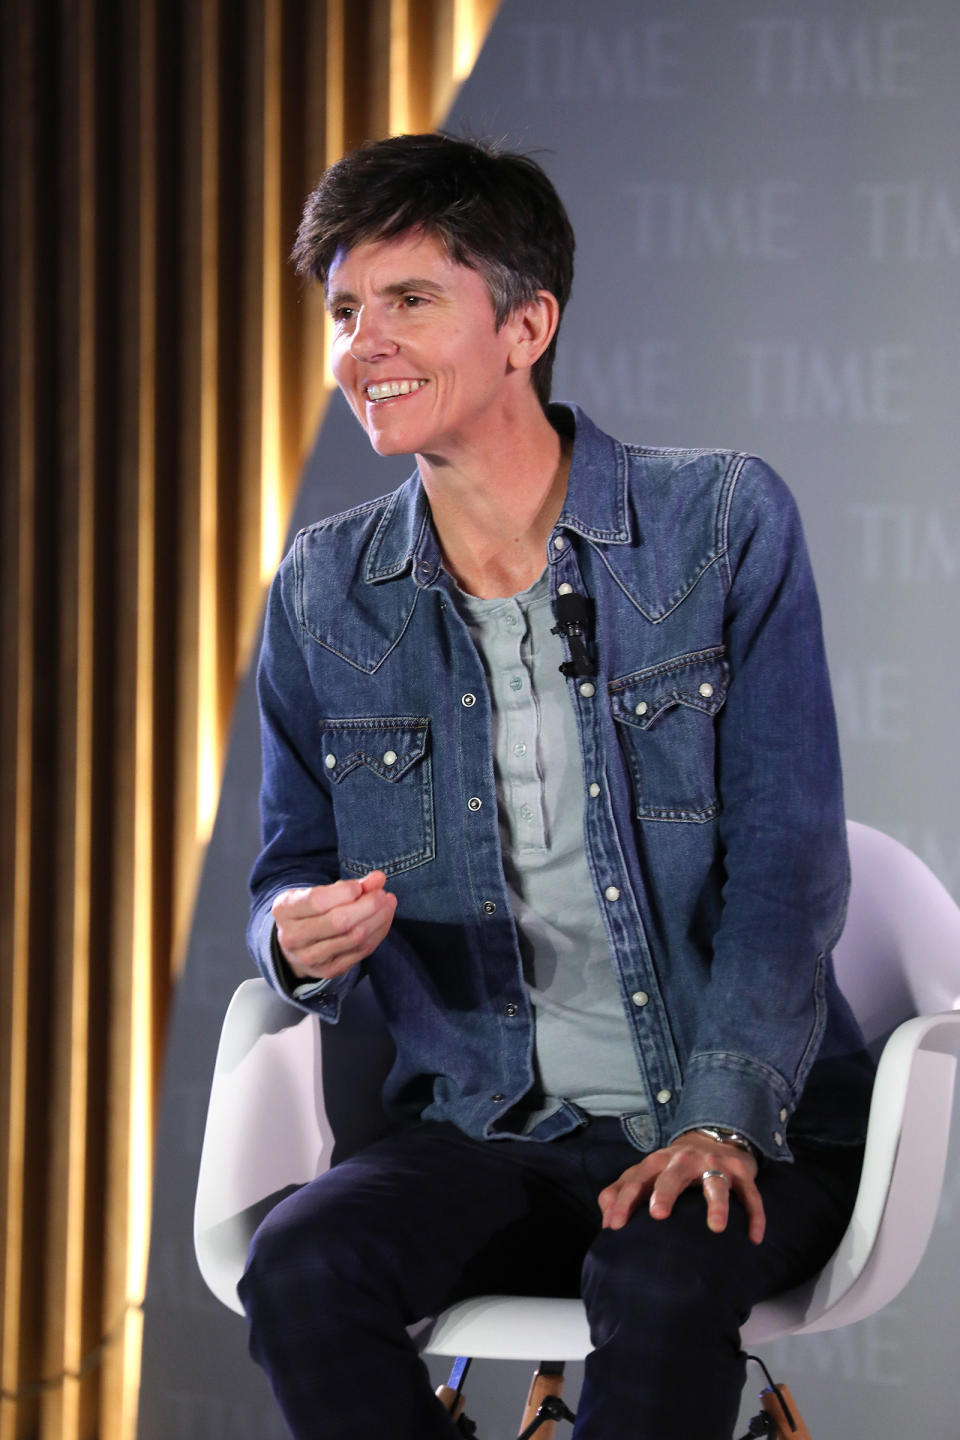 Comedian Tig Notaro speaks onstage during the TIME 100 Health Summit at Pier 17 in New York City on Oct. 17, 2019. | Brian Ach—Getty Images for TIME 100 Health